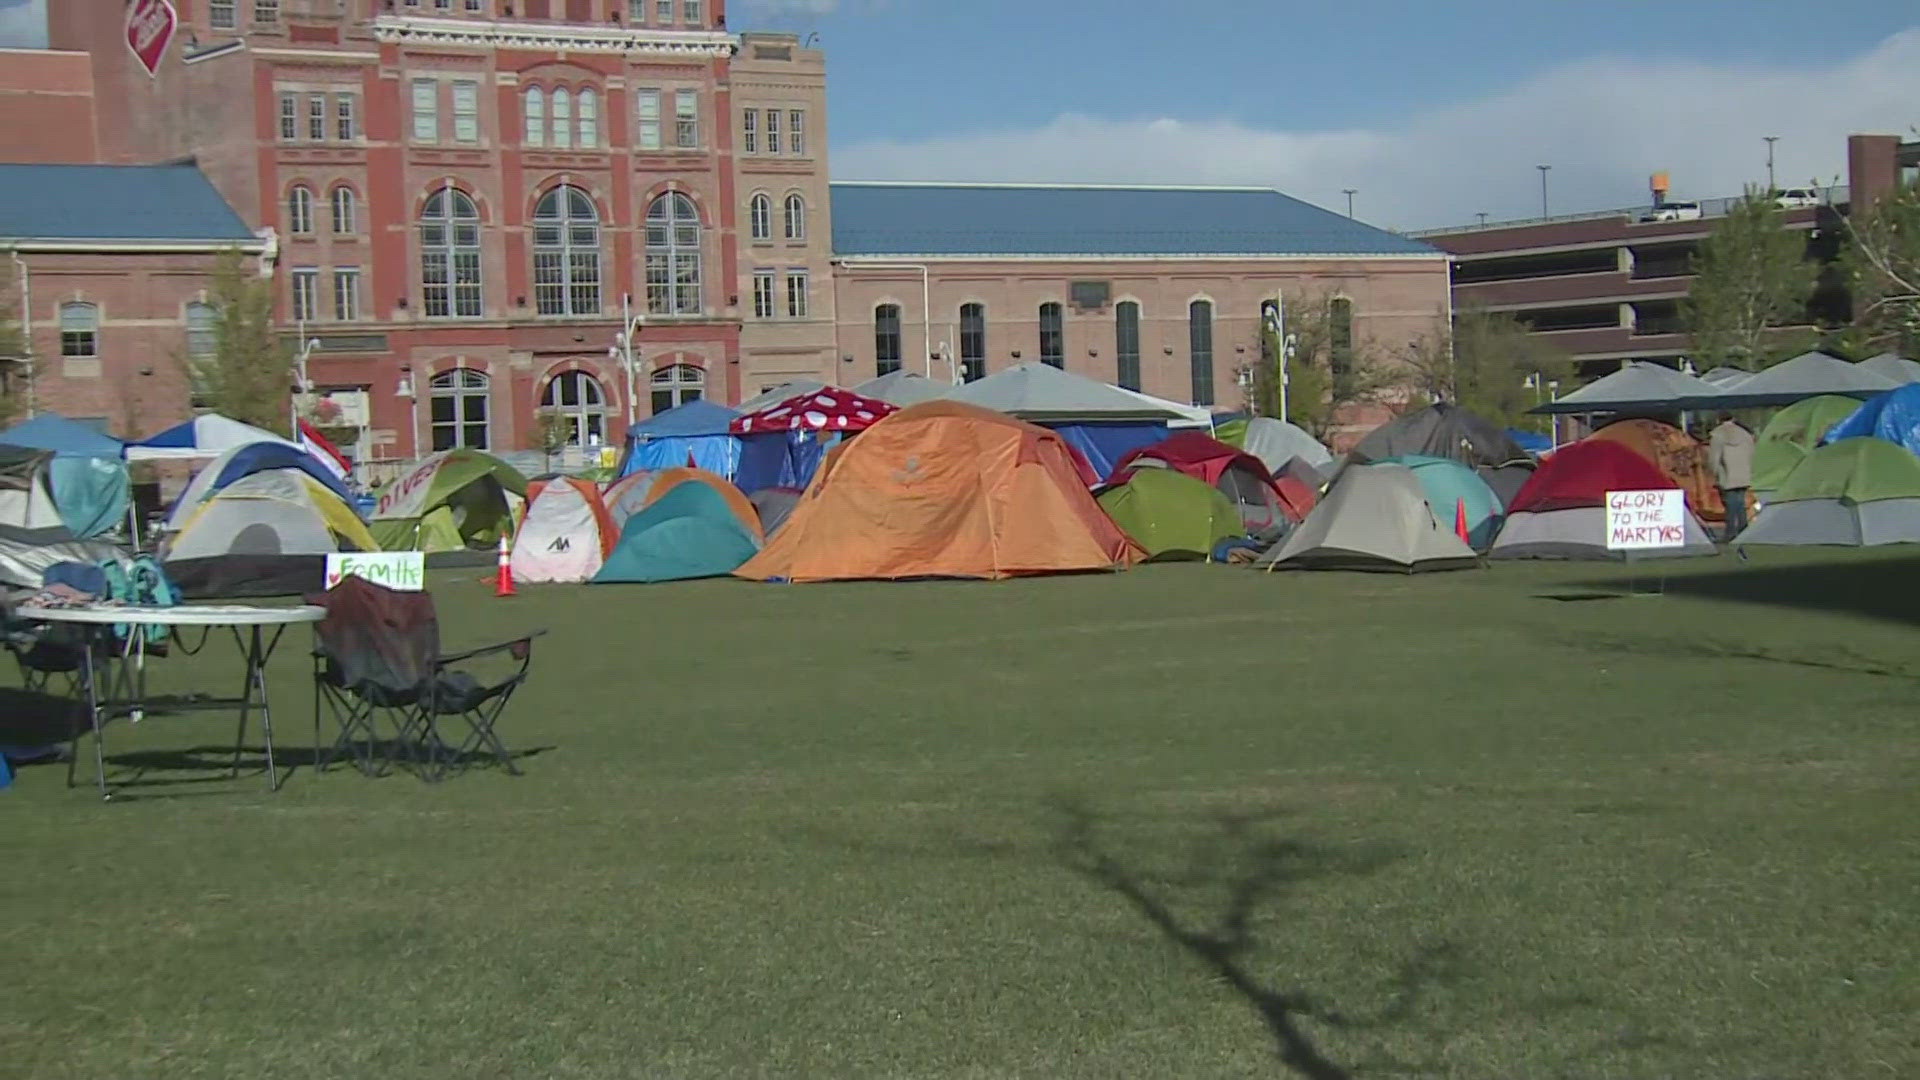 Students at the Auraria campus in Denver are refusing to return to class after they walked out Monday afternoon.